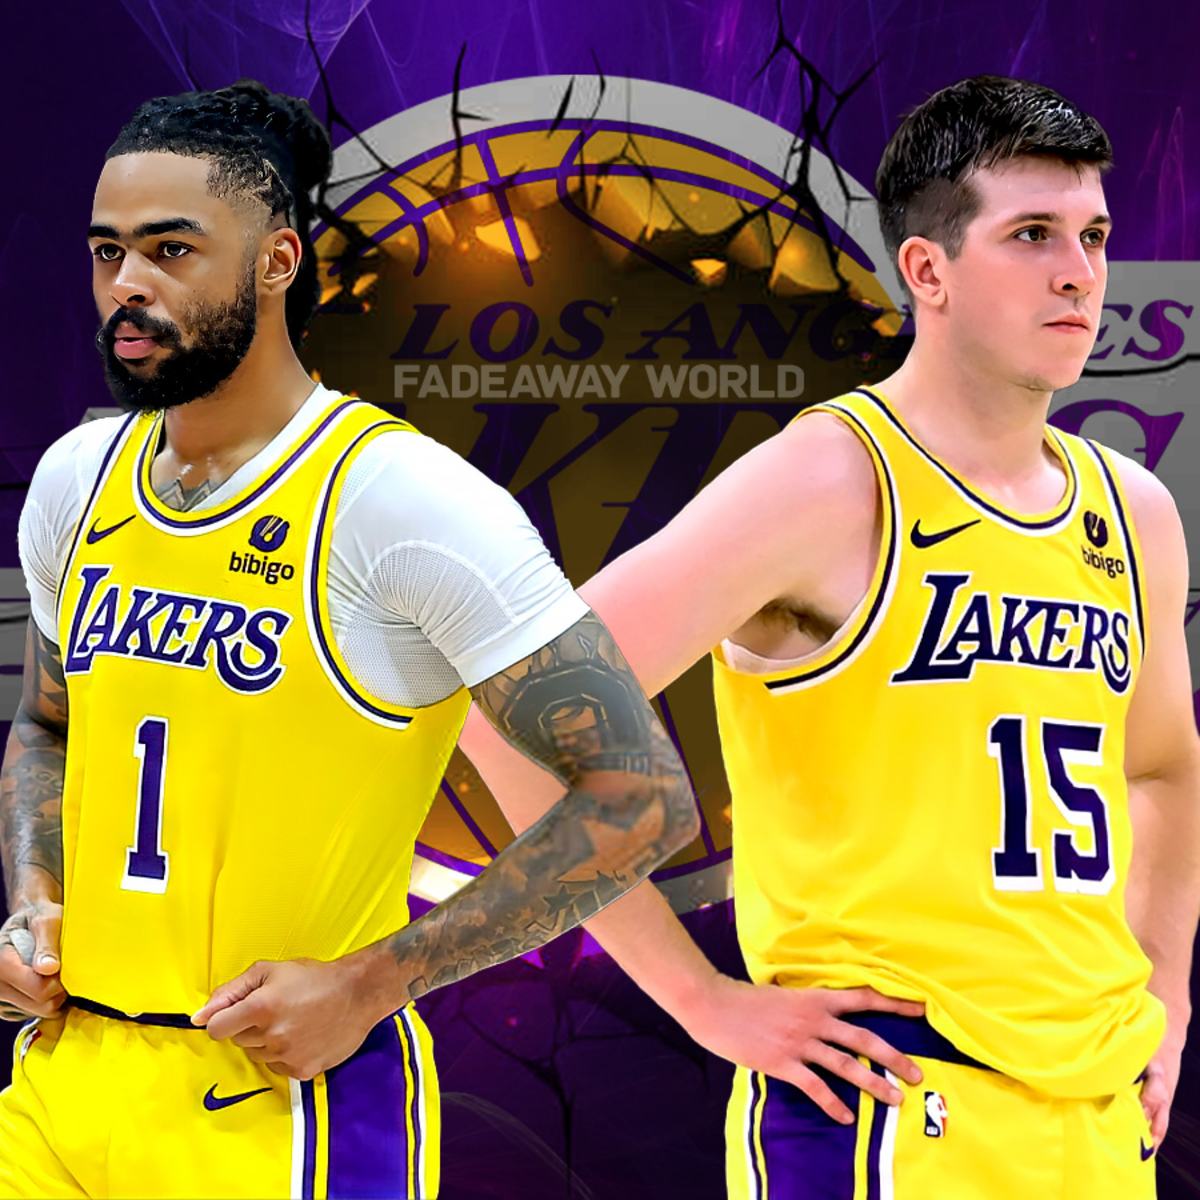 Lakers Players Were Frustrated After Darvin Ham Benched D'Angelo Russell And Austin Reaves During The Season - Fadeaway World